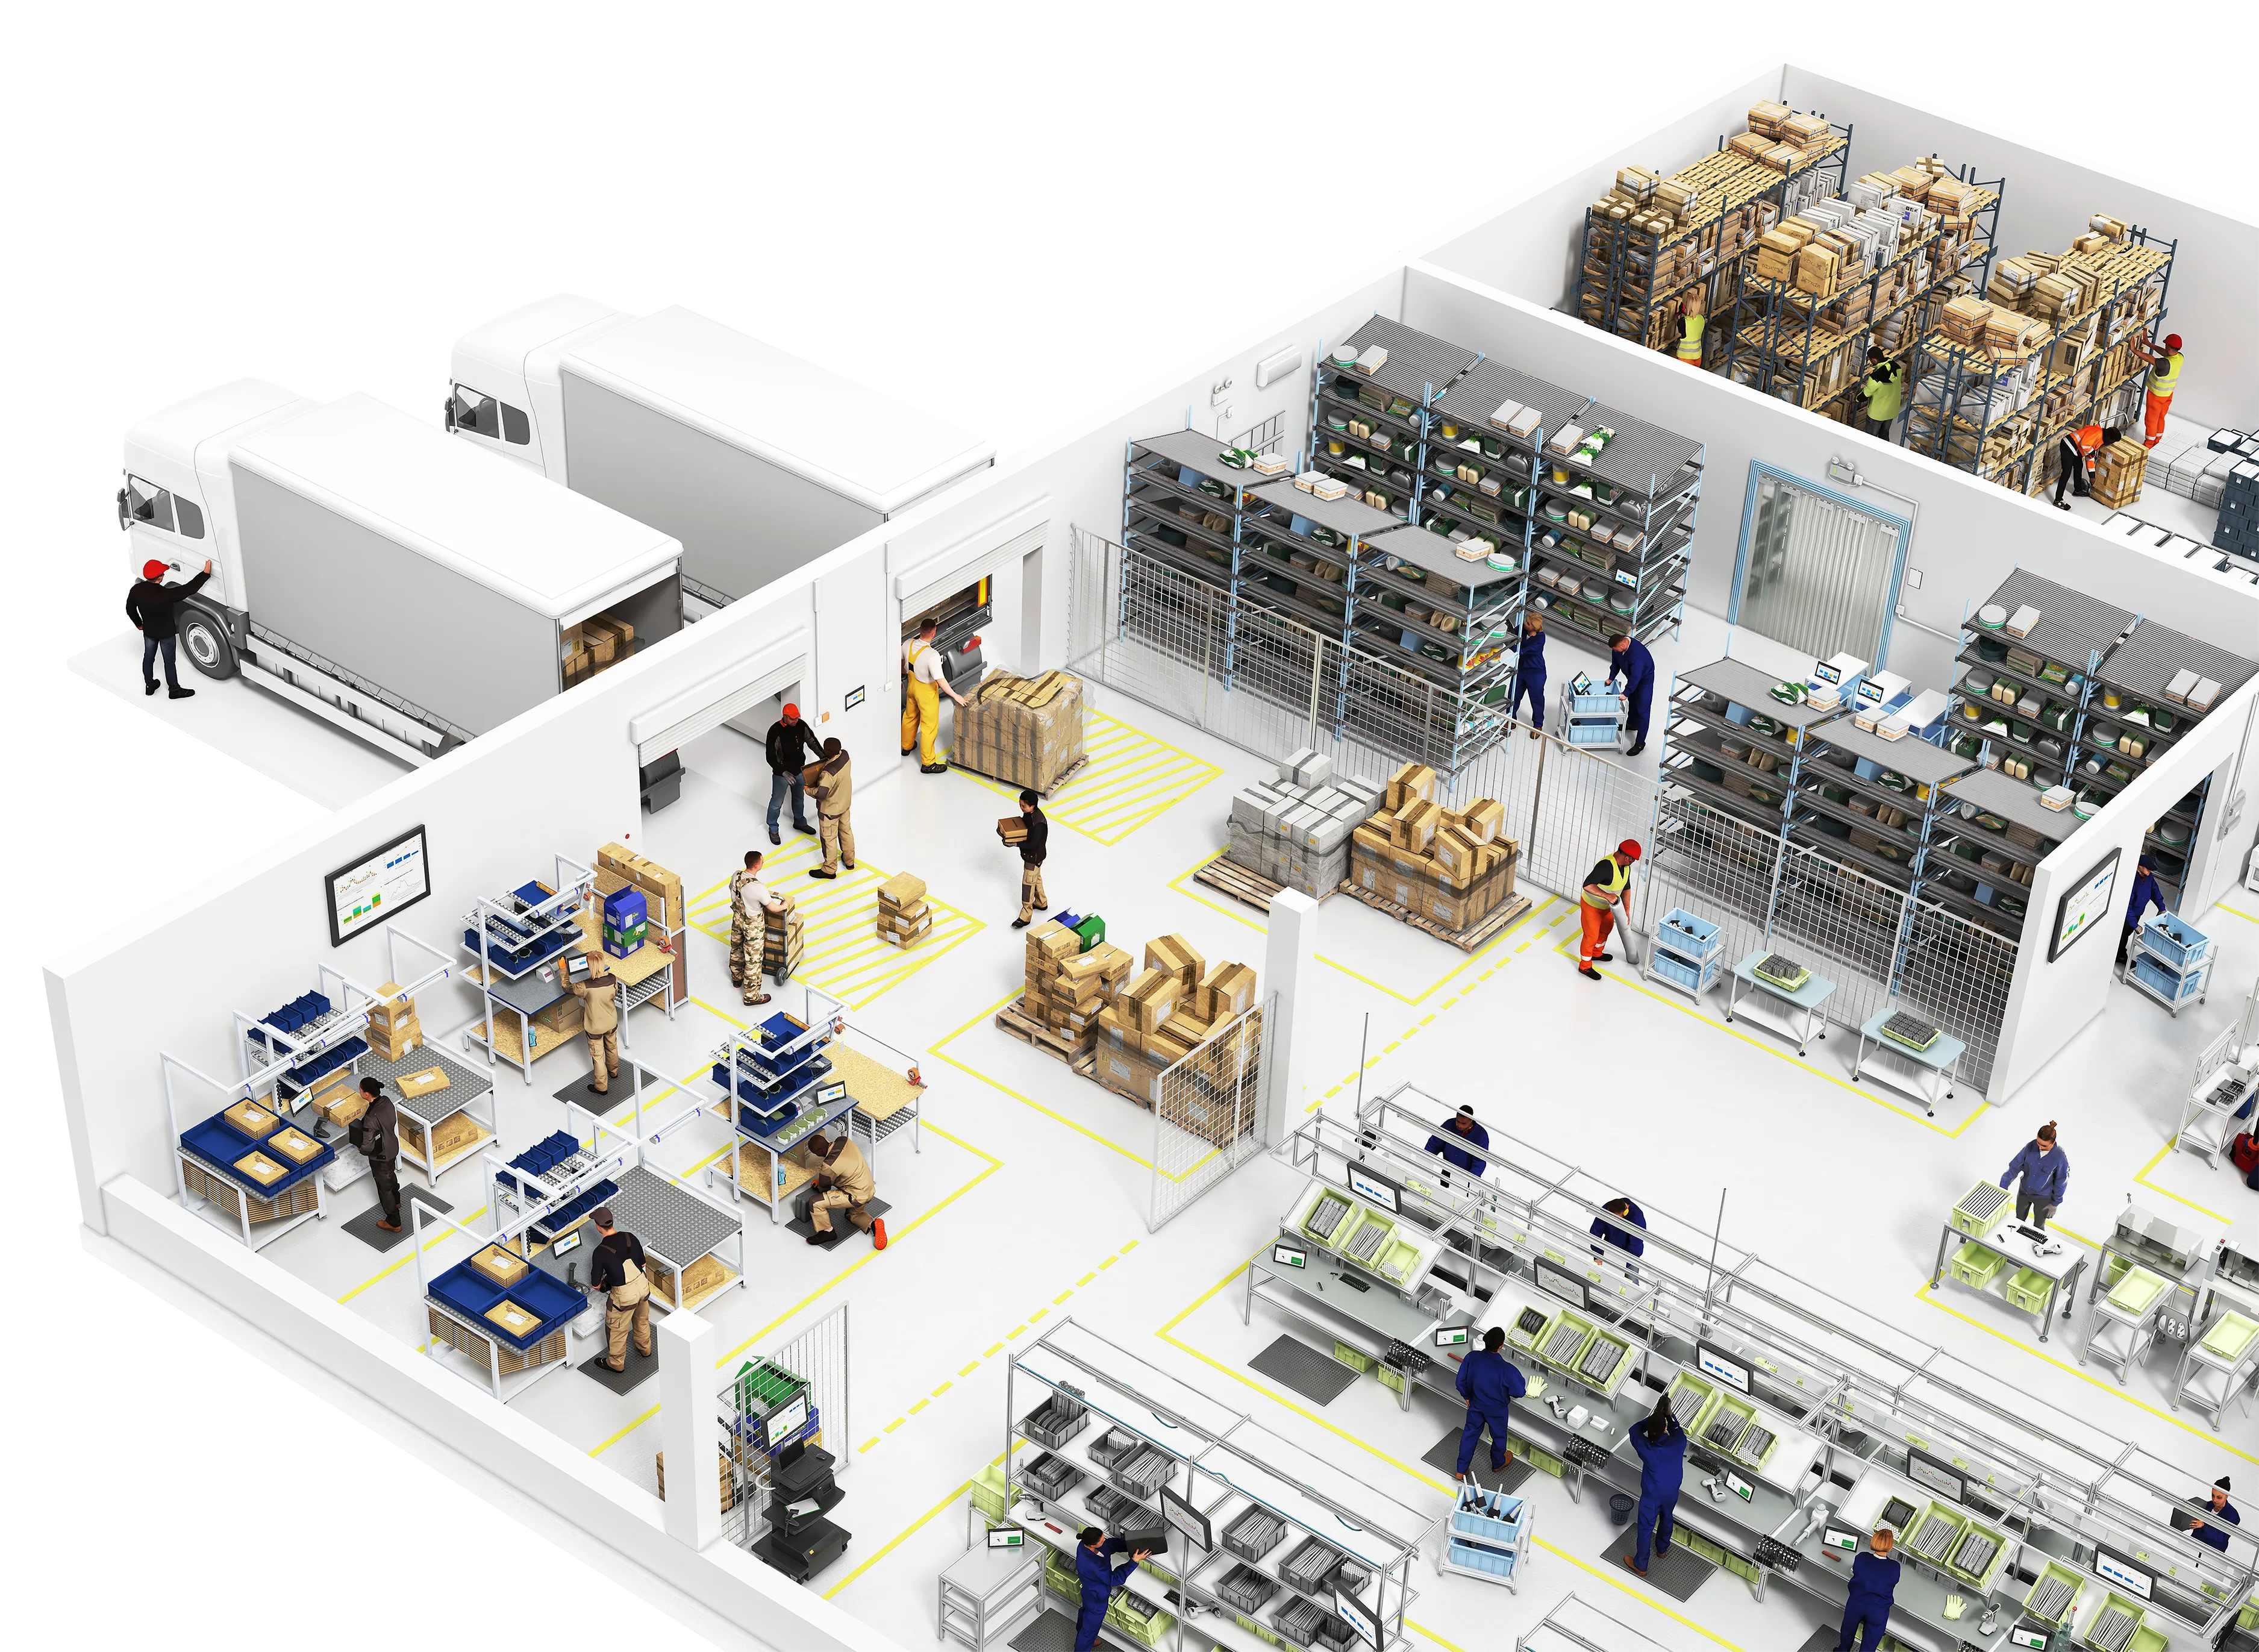 Day-in-the-life of a manufacturing facility illustration